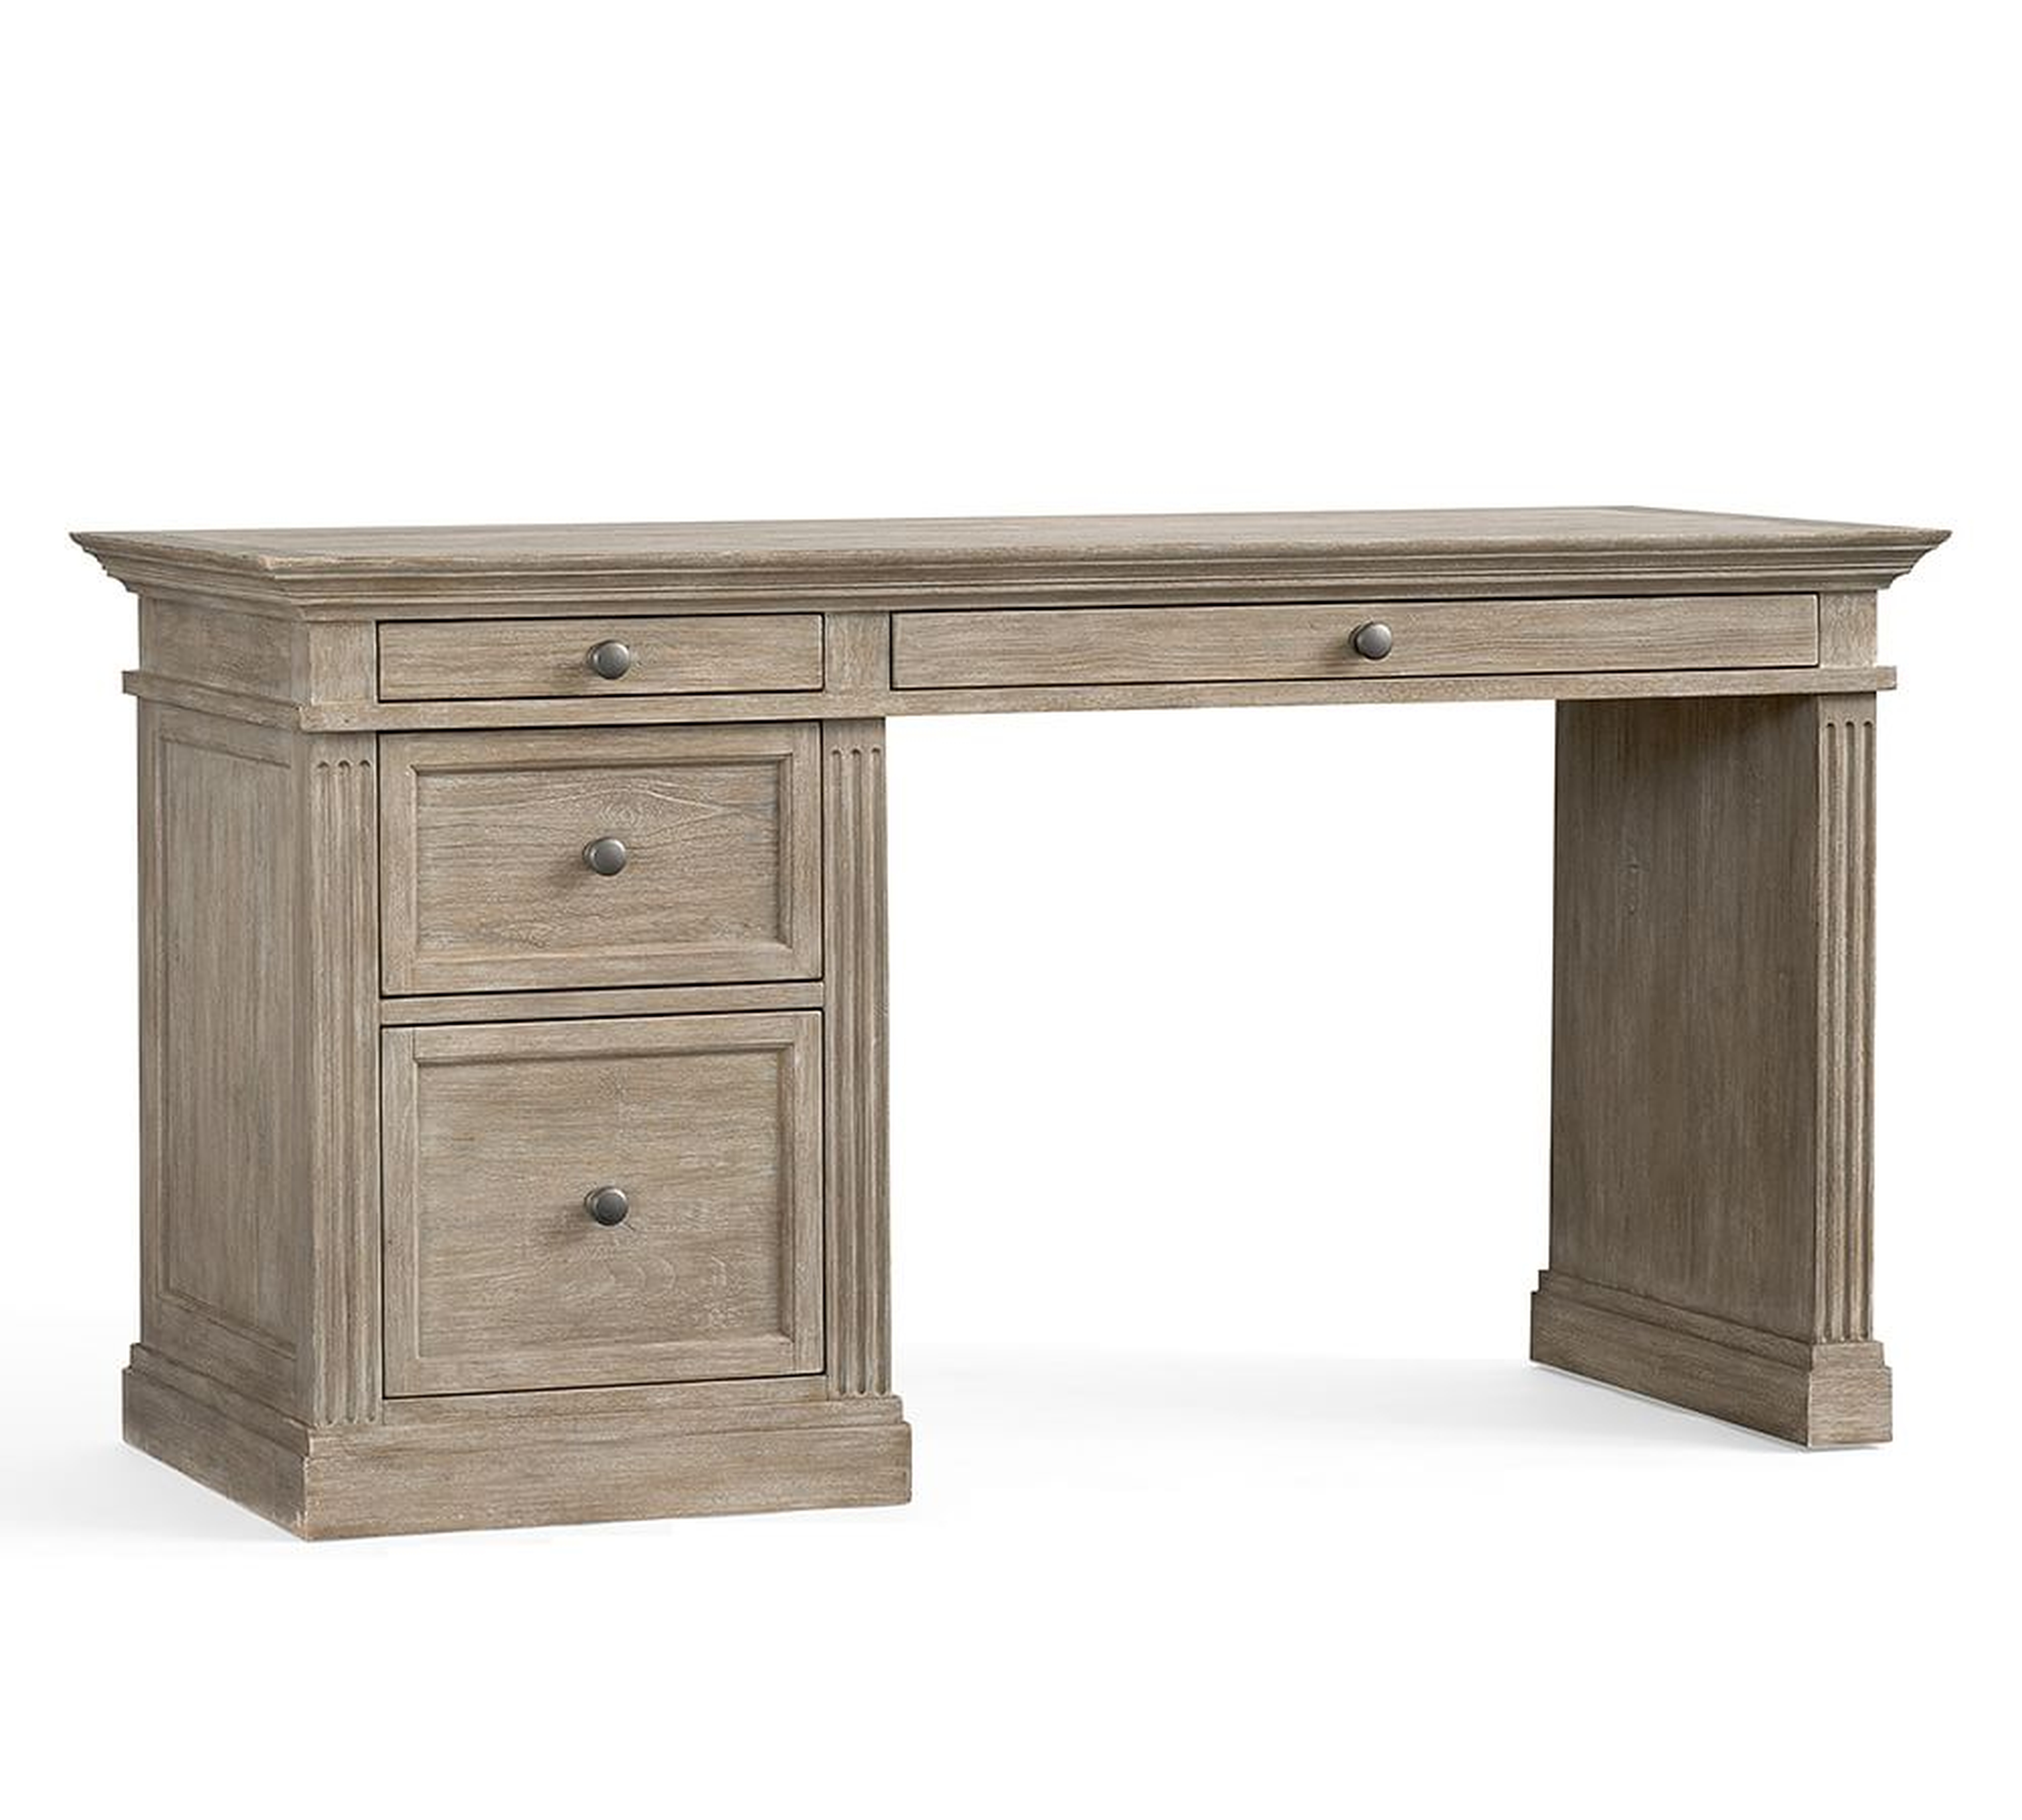 Livingston 57" Writing Desk with Drawers, Gray Wash - Pottery Barn